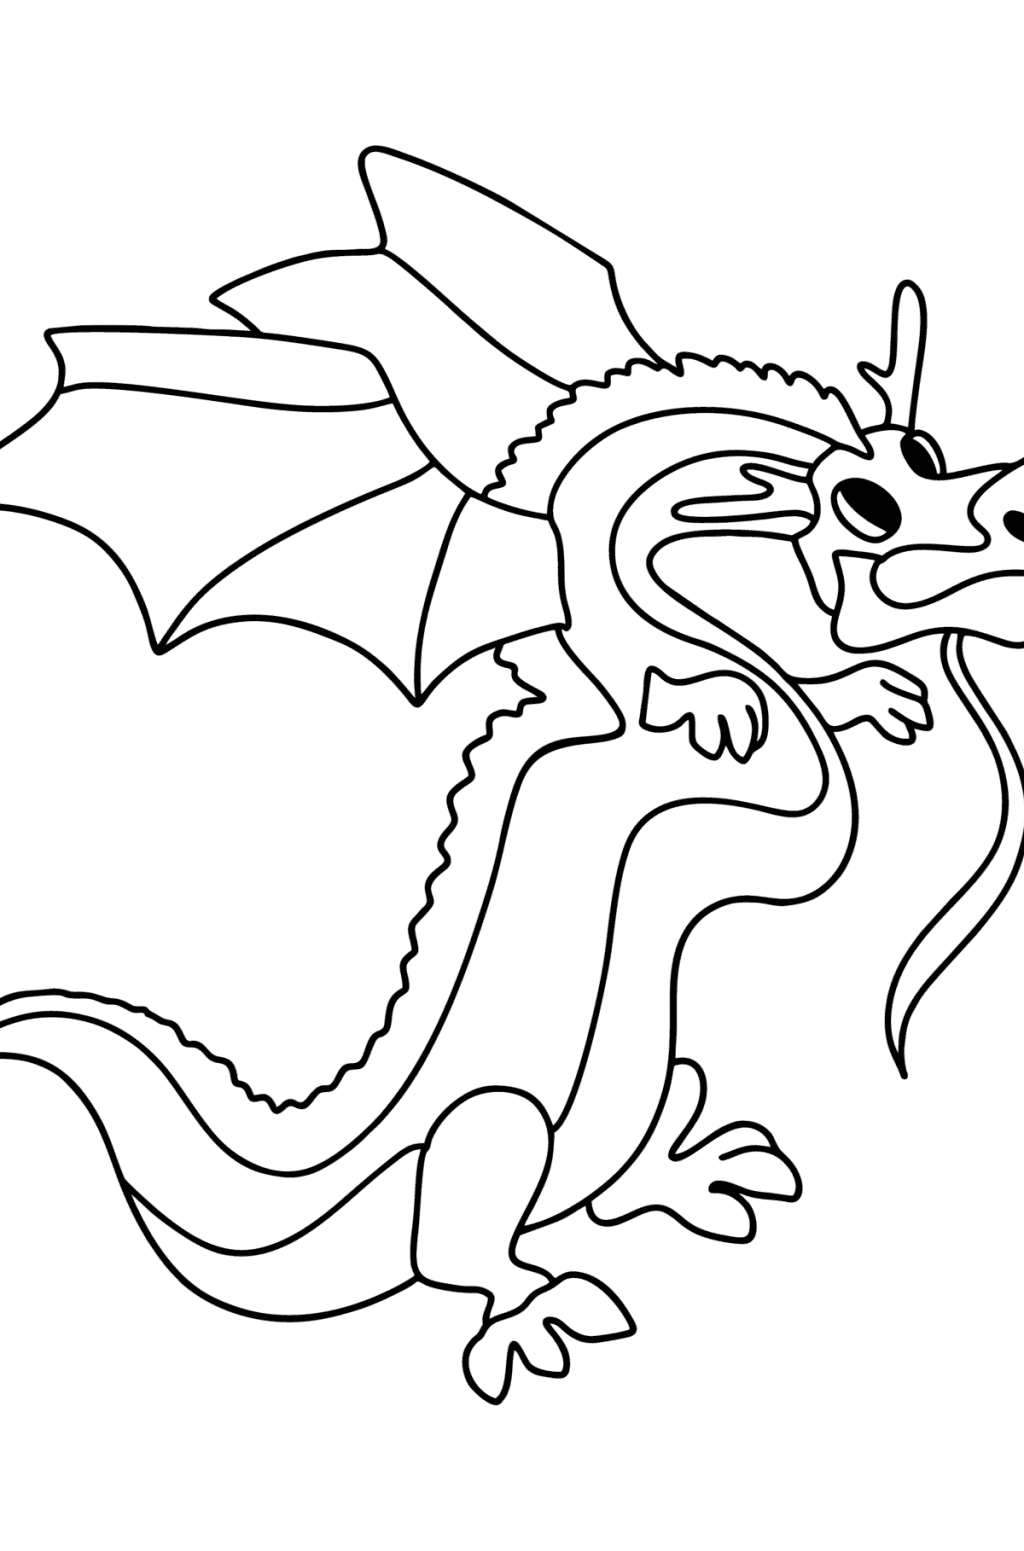 Dragon Coloring Pages for Kids - Download, Print, and Color Online!